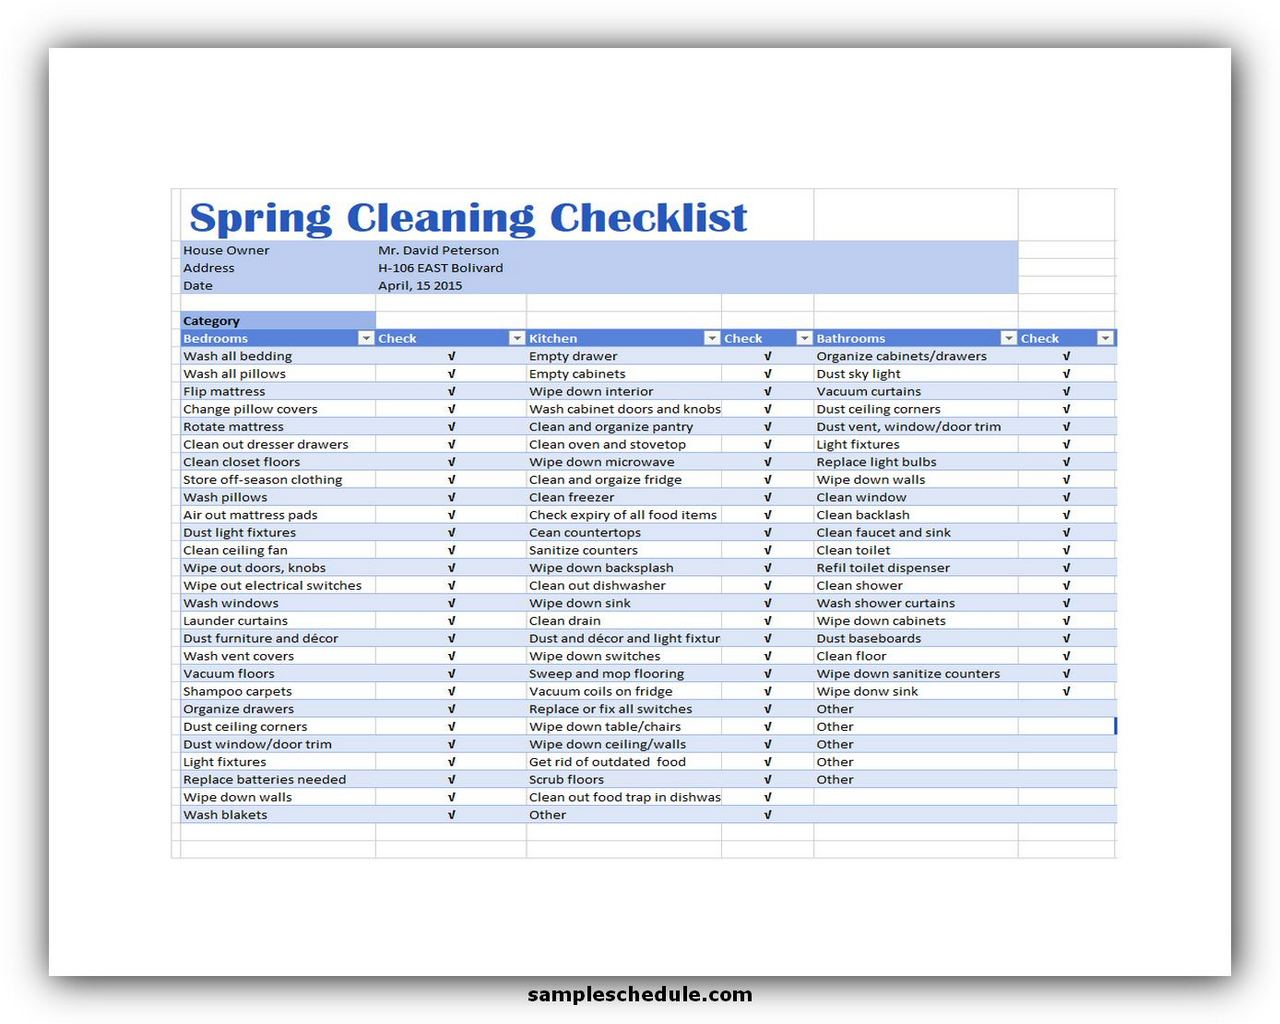 11+ Cleaning Checklist Template Excel  sample schedule Within Cleaning Services Checklist Template For Cleaning Services Checklist Template